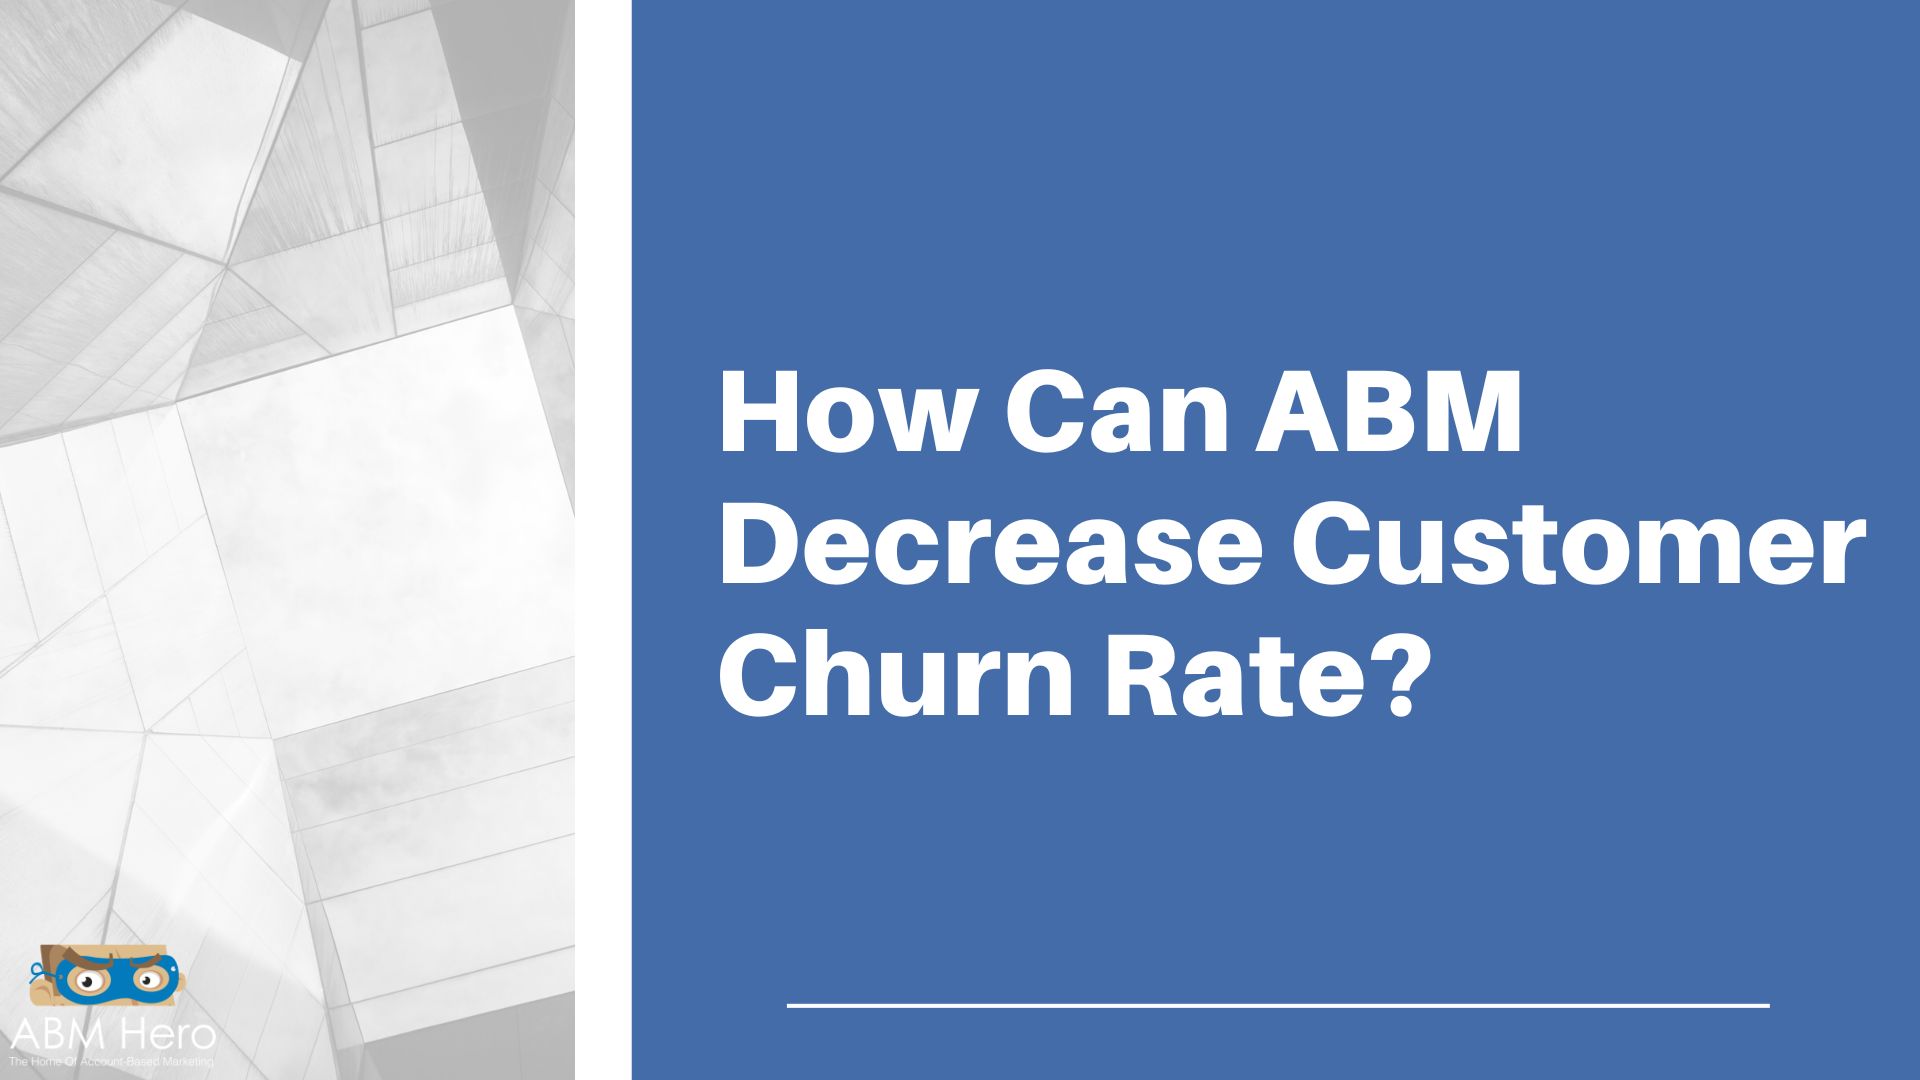 You are currently viewing How Can ABM Decrease Customer Churn Rate?